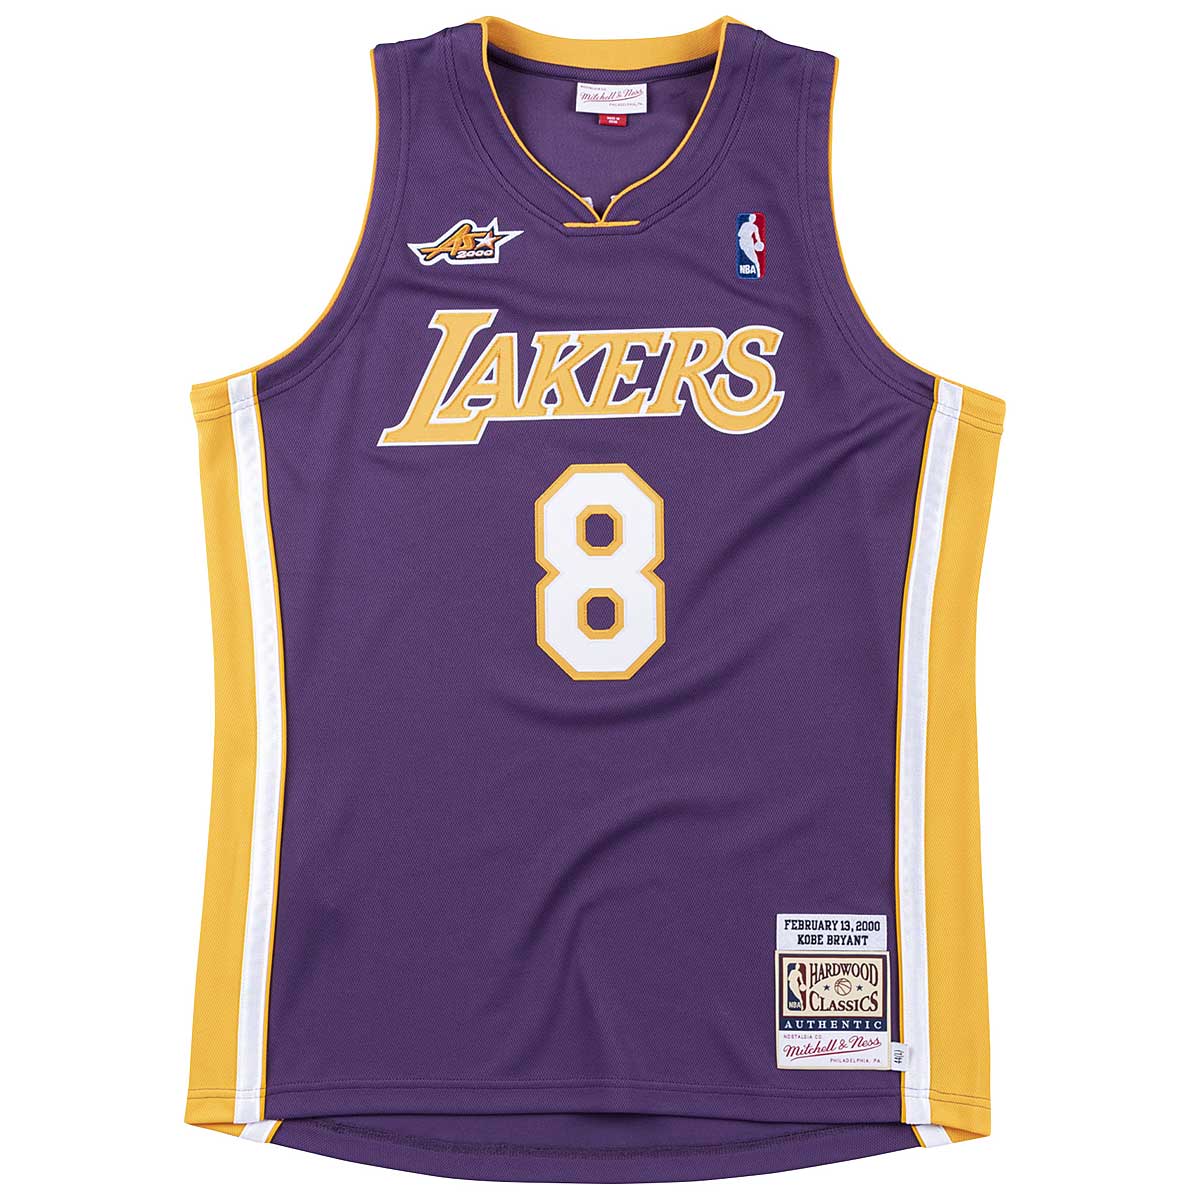 Image of Mitchell And Ness NBA Los Angeles Lakers Authentic Jersey - Kobe Bryant #8 '08-'09, Purple